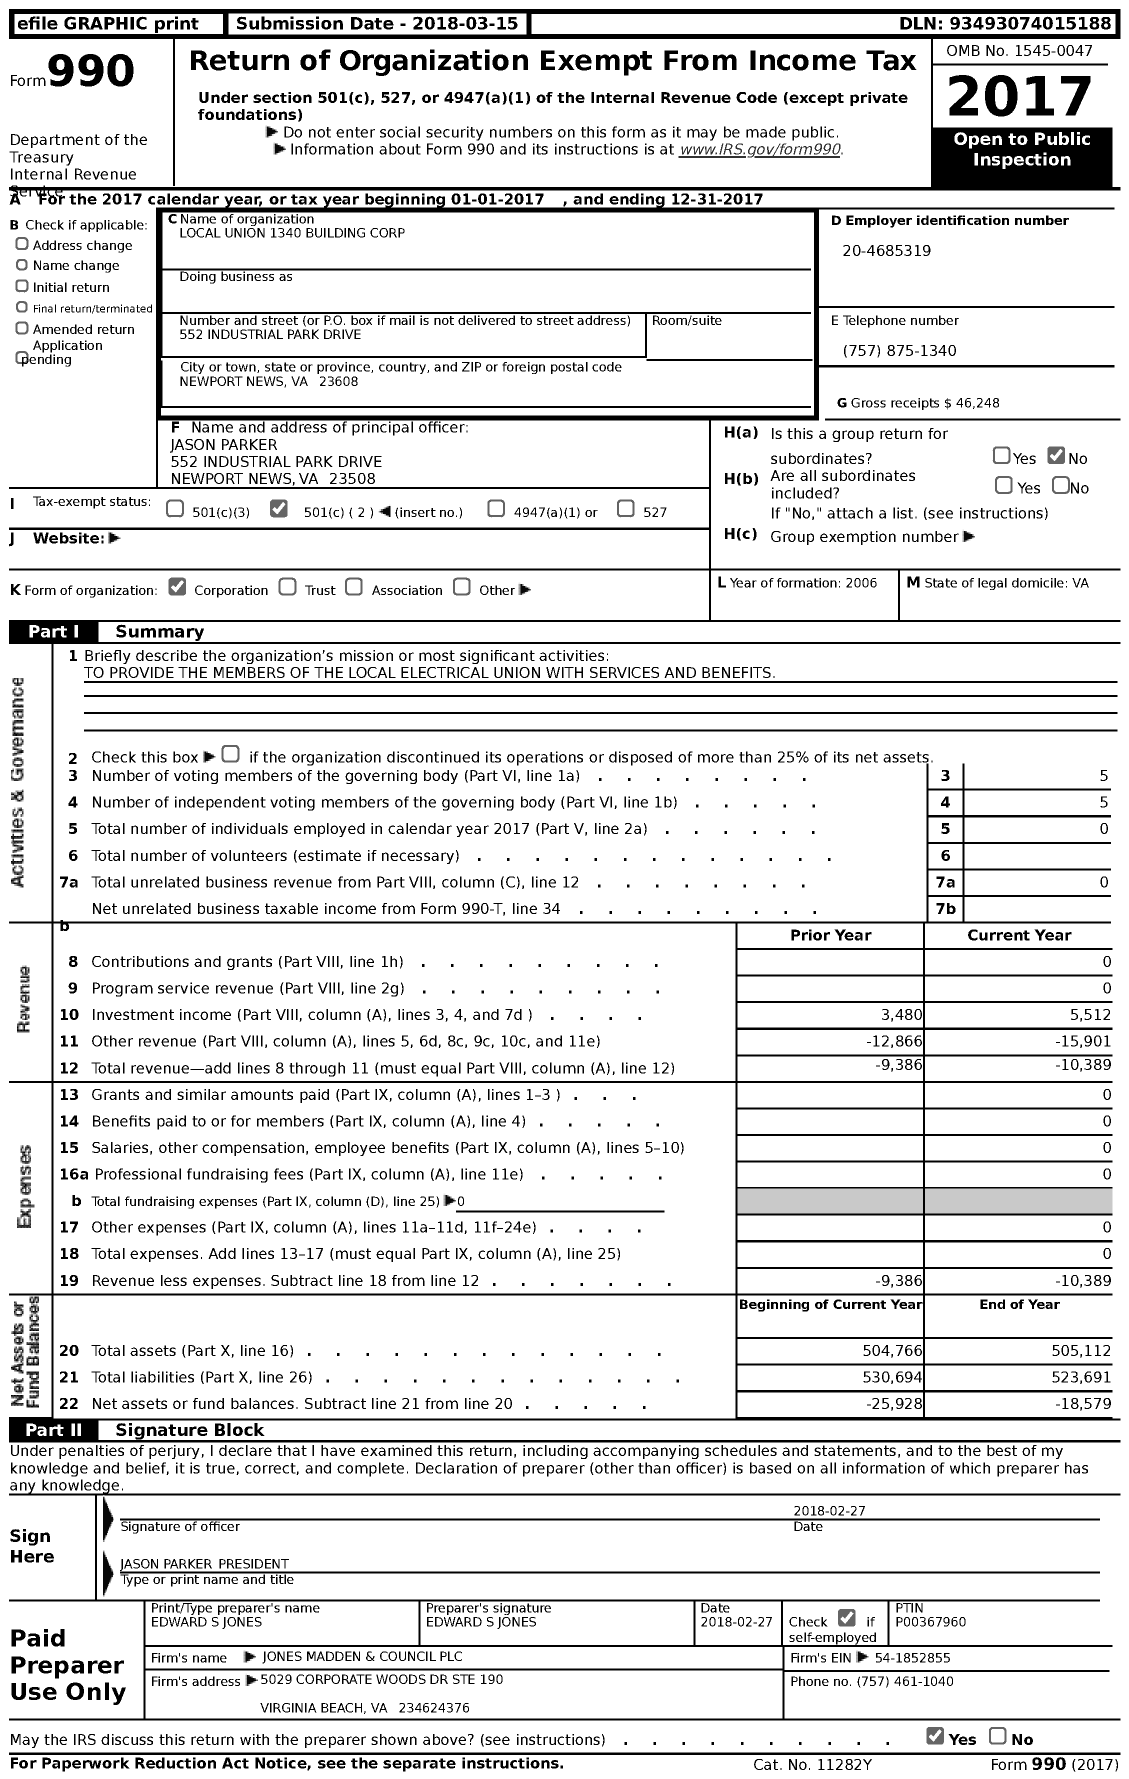 Image of first page of 2017 Form 990 for Local Union 1340 Building Corporation